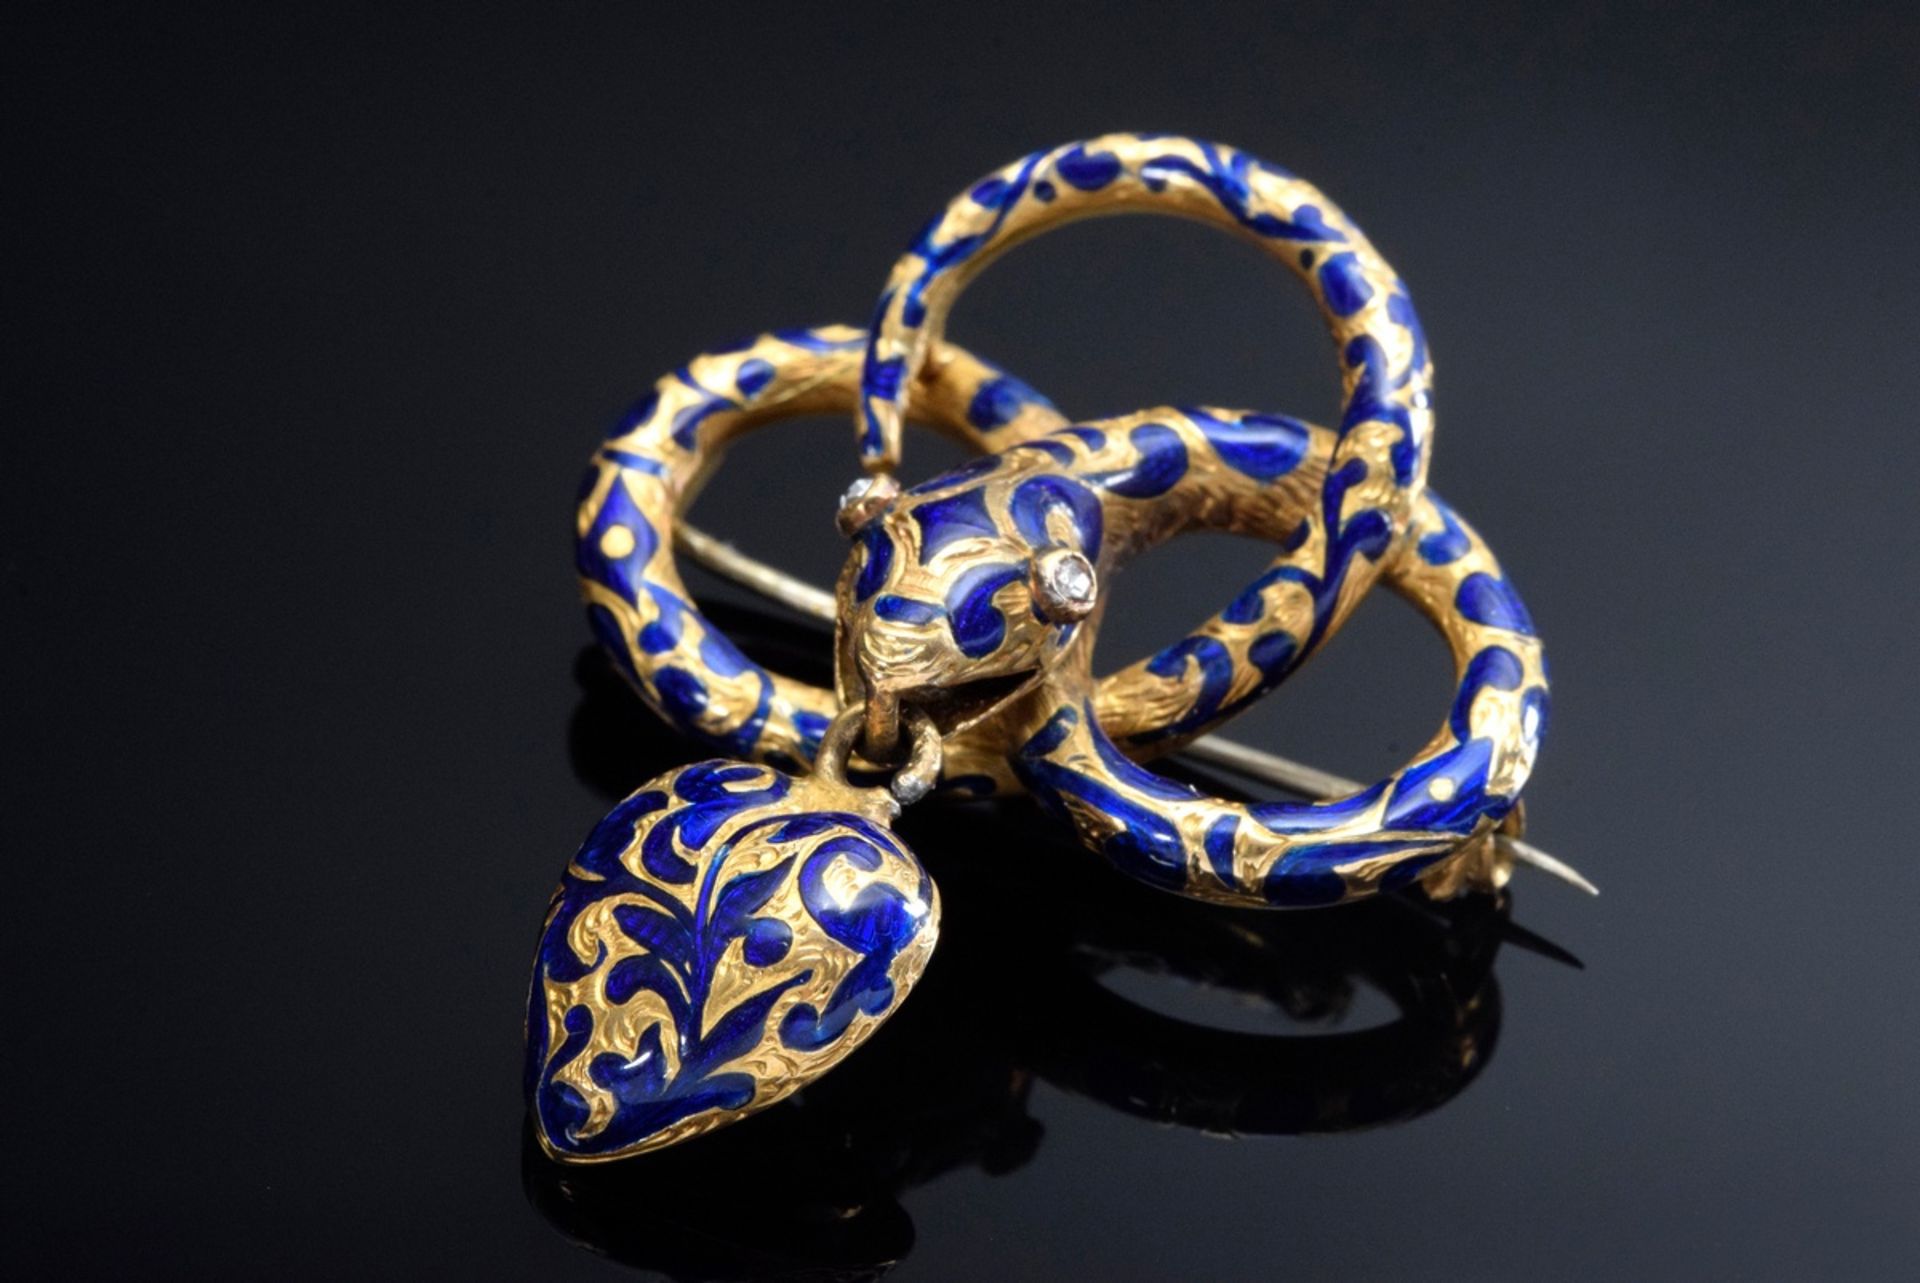 Museal memoir pin "Snake" with blue enamelled YG 750 body and diamond rose eyes, movable "heart" pe